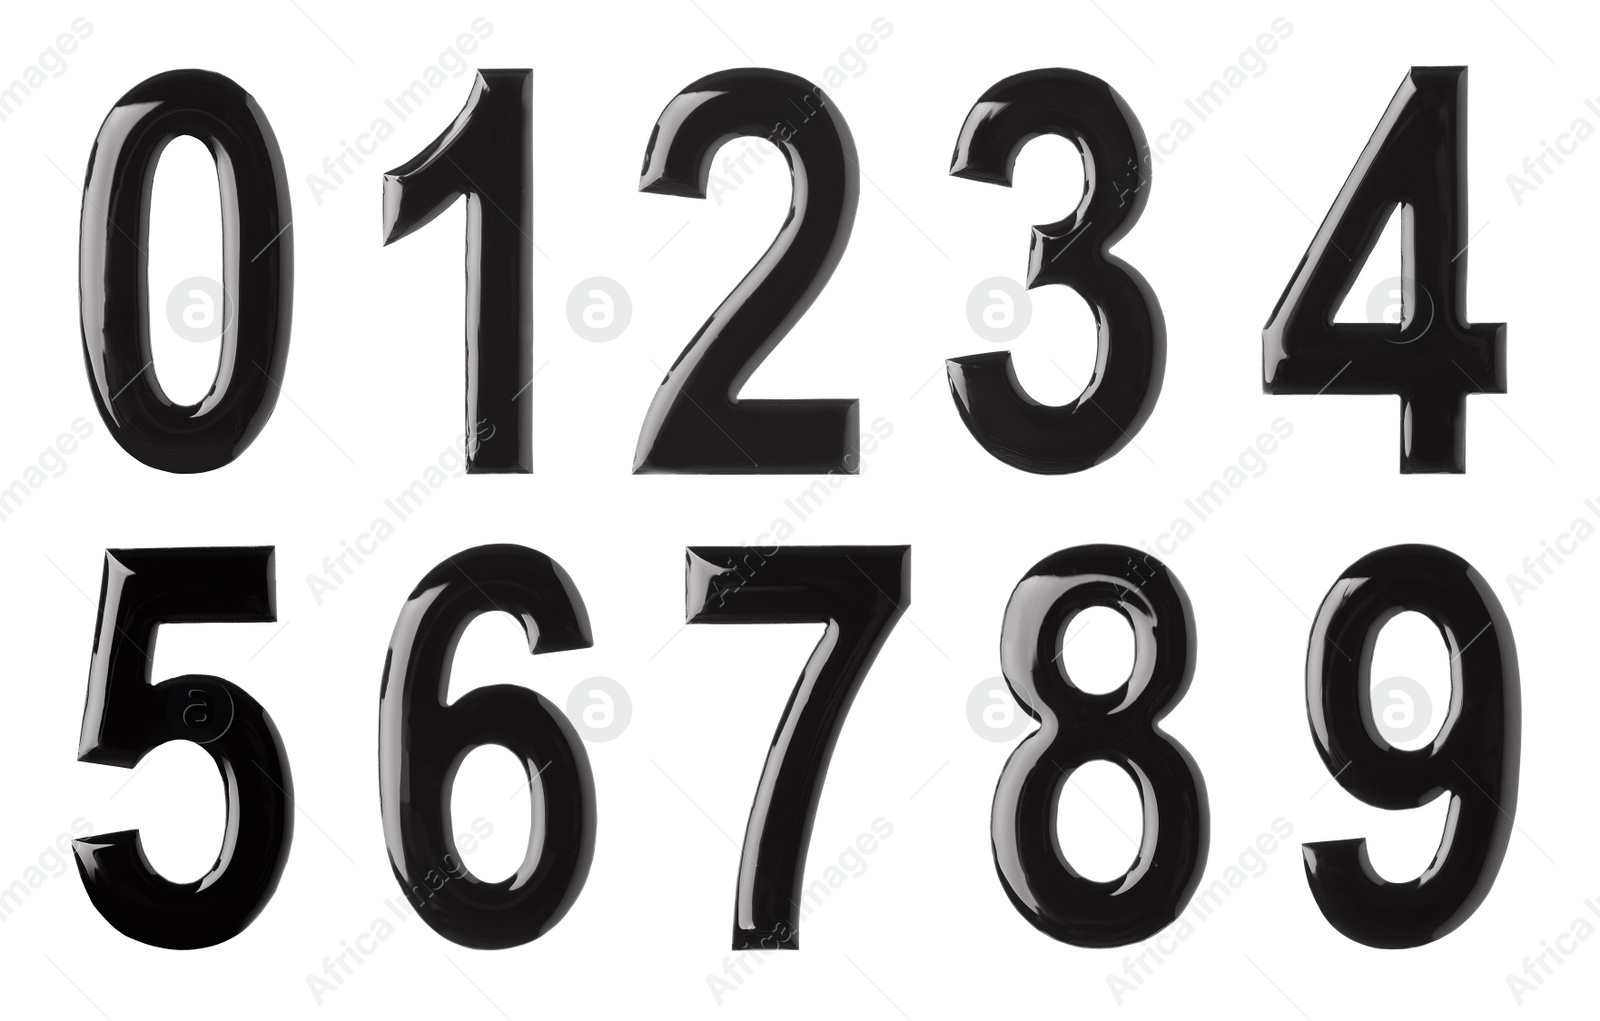 Image of Digits from 0 to 9 made of melted chocolate on white background